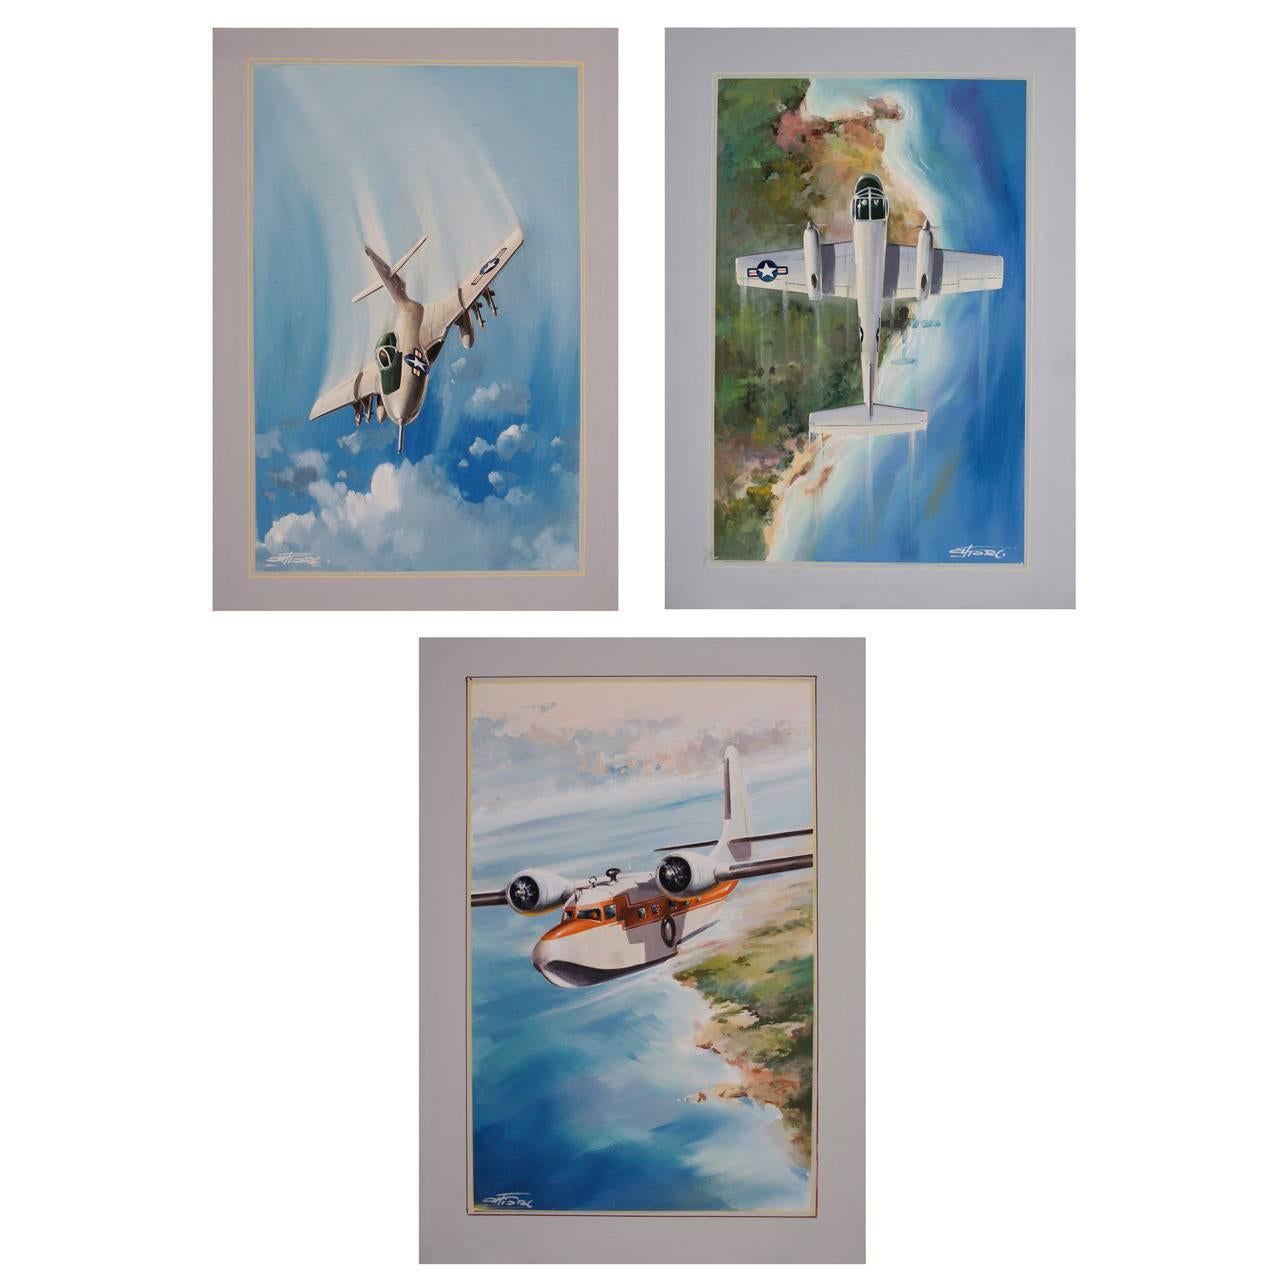 A set of three remarkable jet plane watercolors created by Italian artist Amleto Fiore, c. 1950's, all signed.  Fiore (1920-2008) was an accomplished illustrator during World War II. His aviation and maritime pieces are particularly prized.